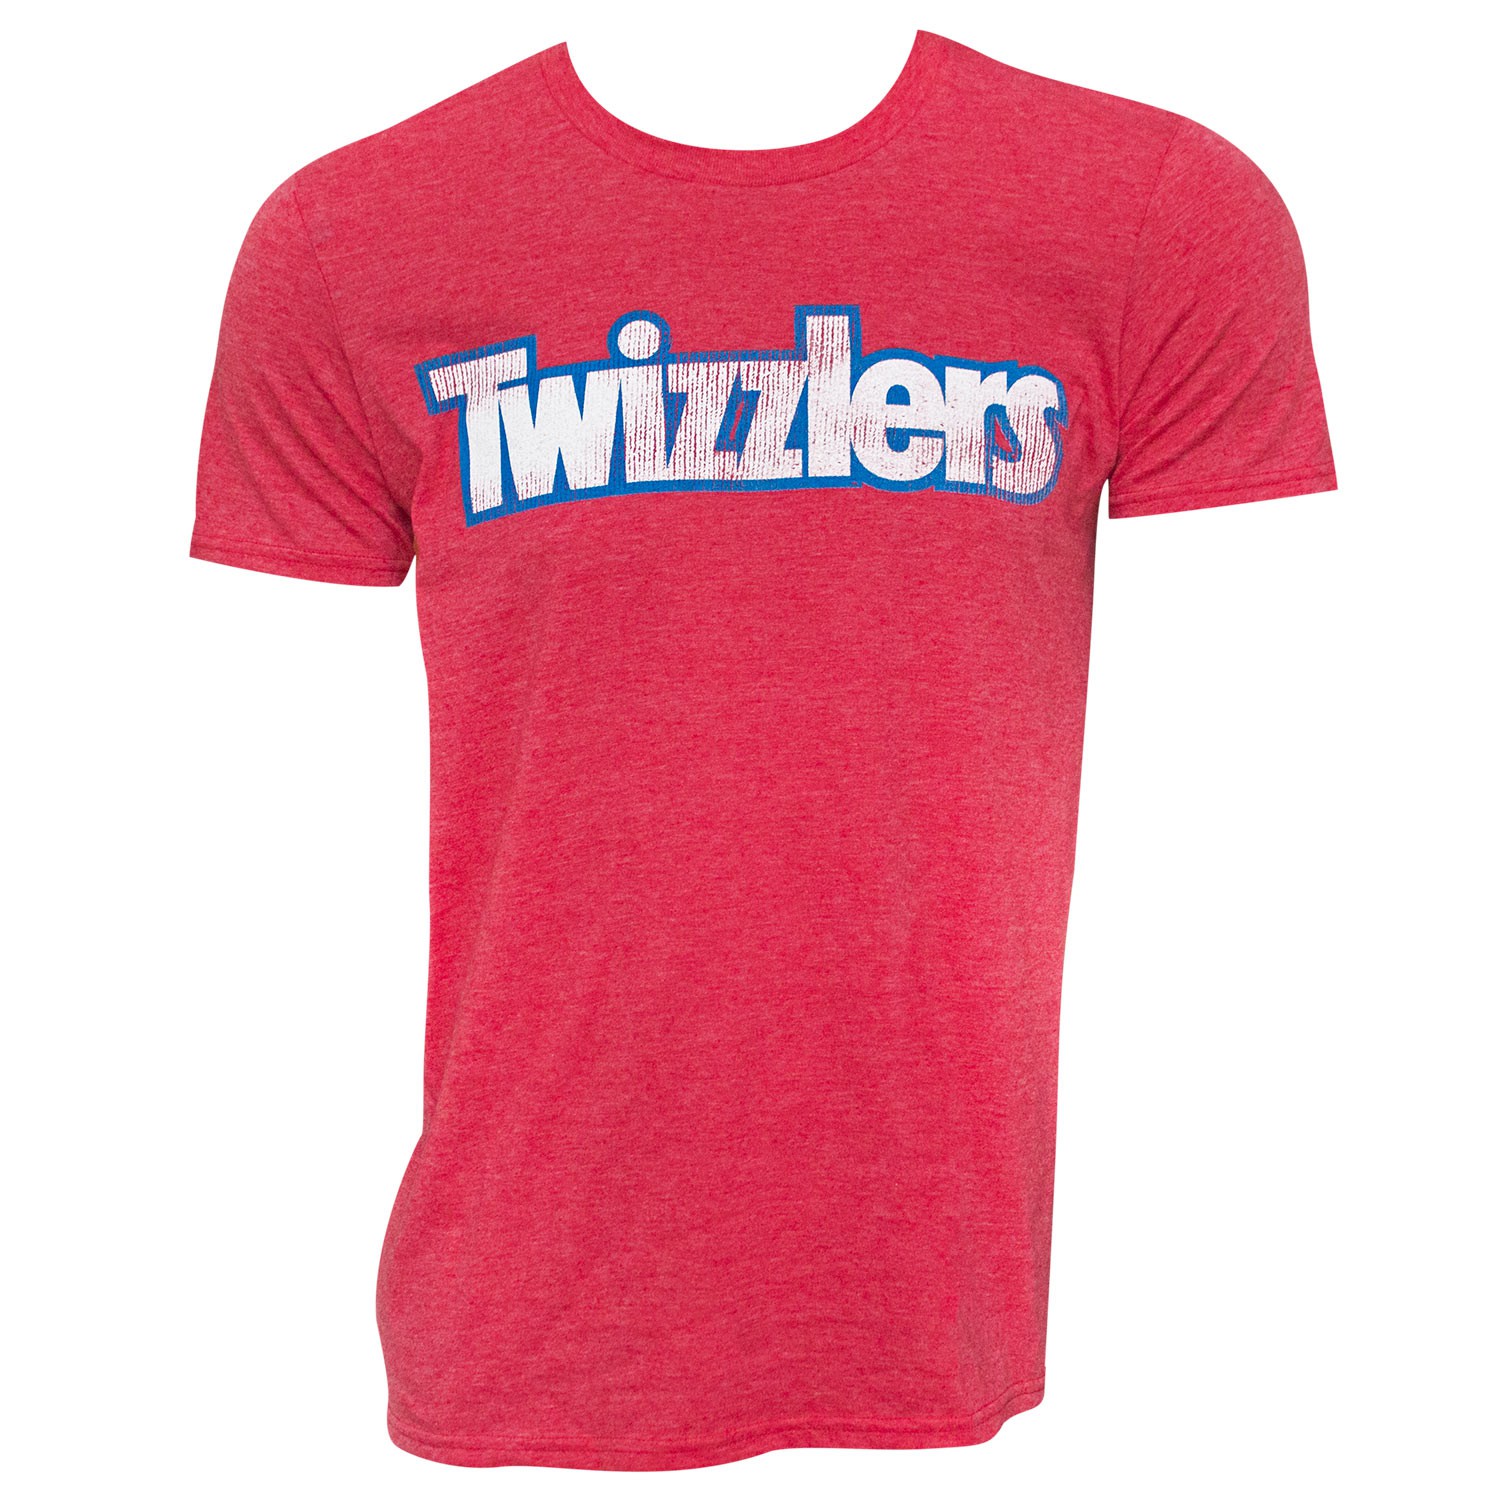 Twizzlers Men's Red T-Shirt